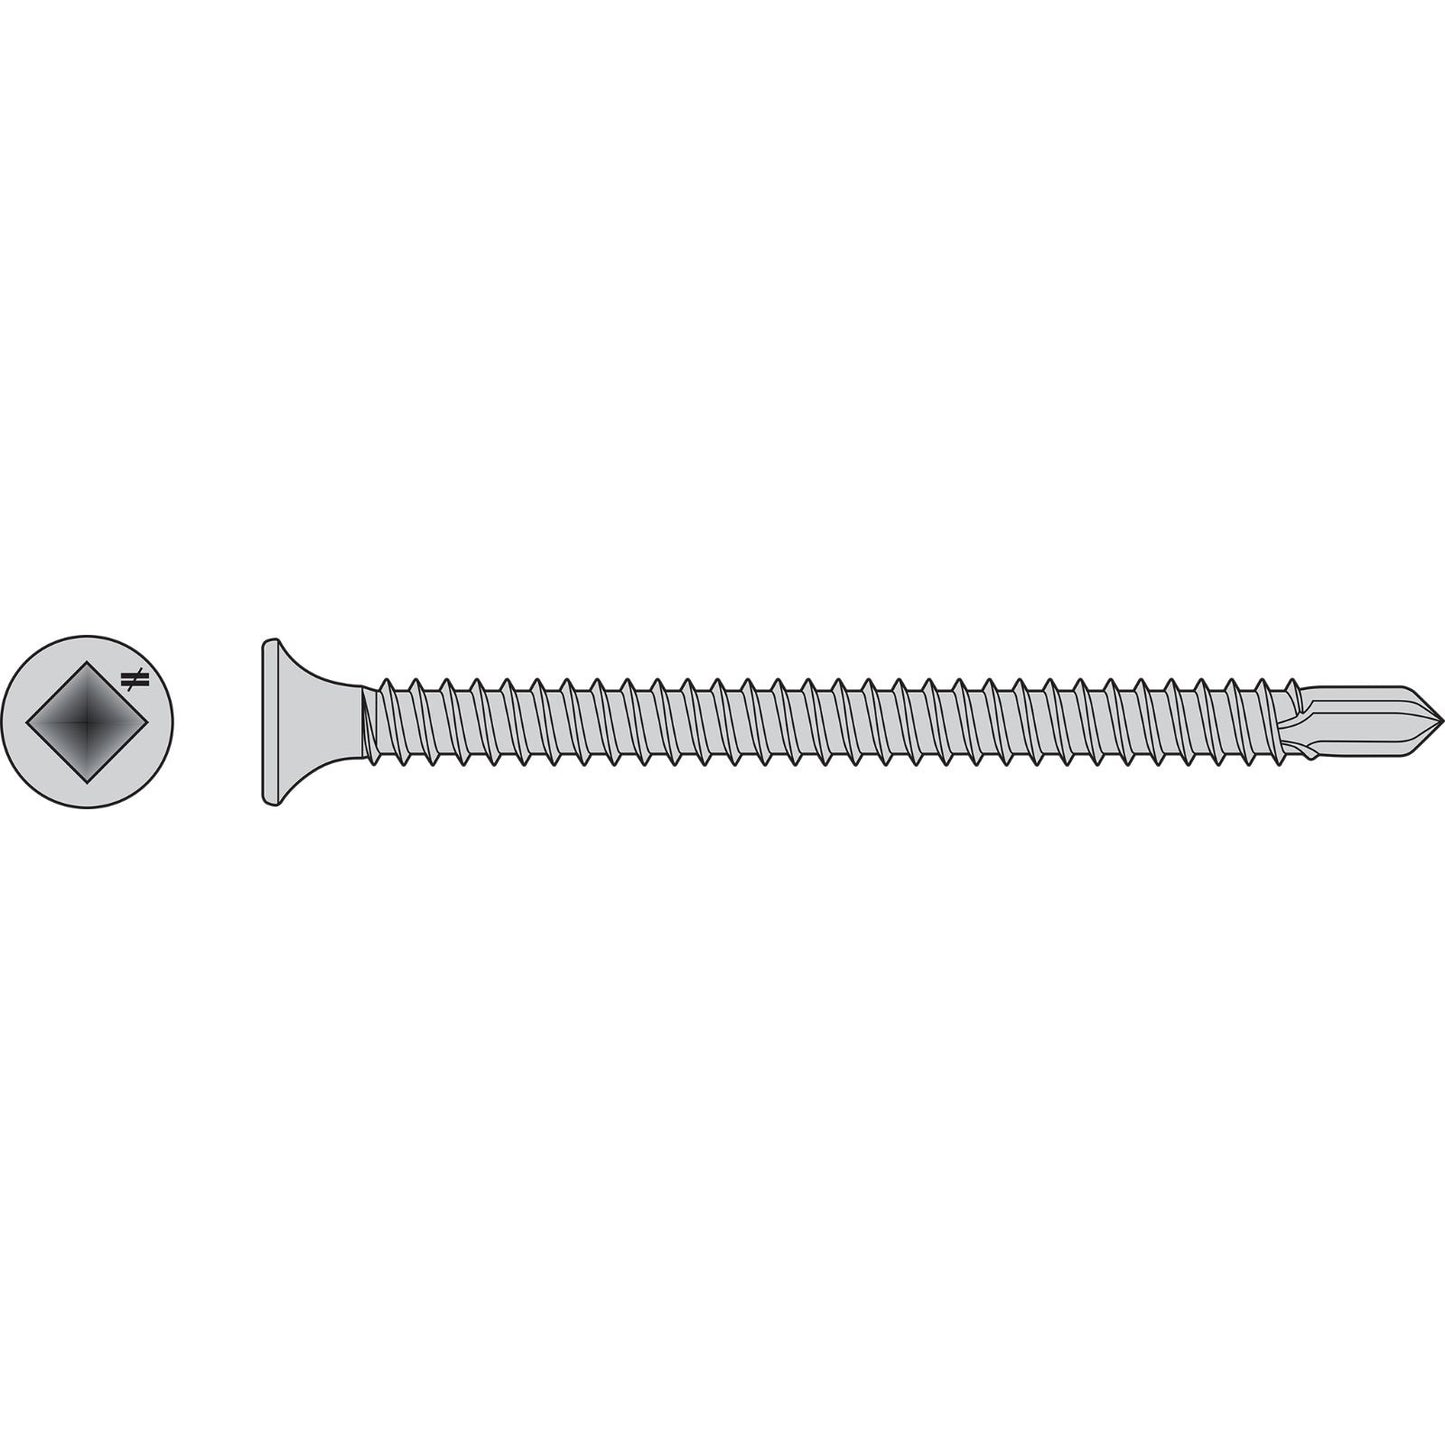 #10 x 212 inch Square Drive SelfDrilling BugleHead Screw 410 Stainless Steel Pkg 2000